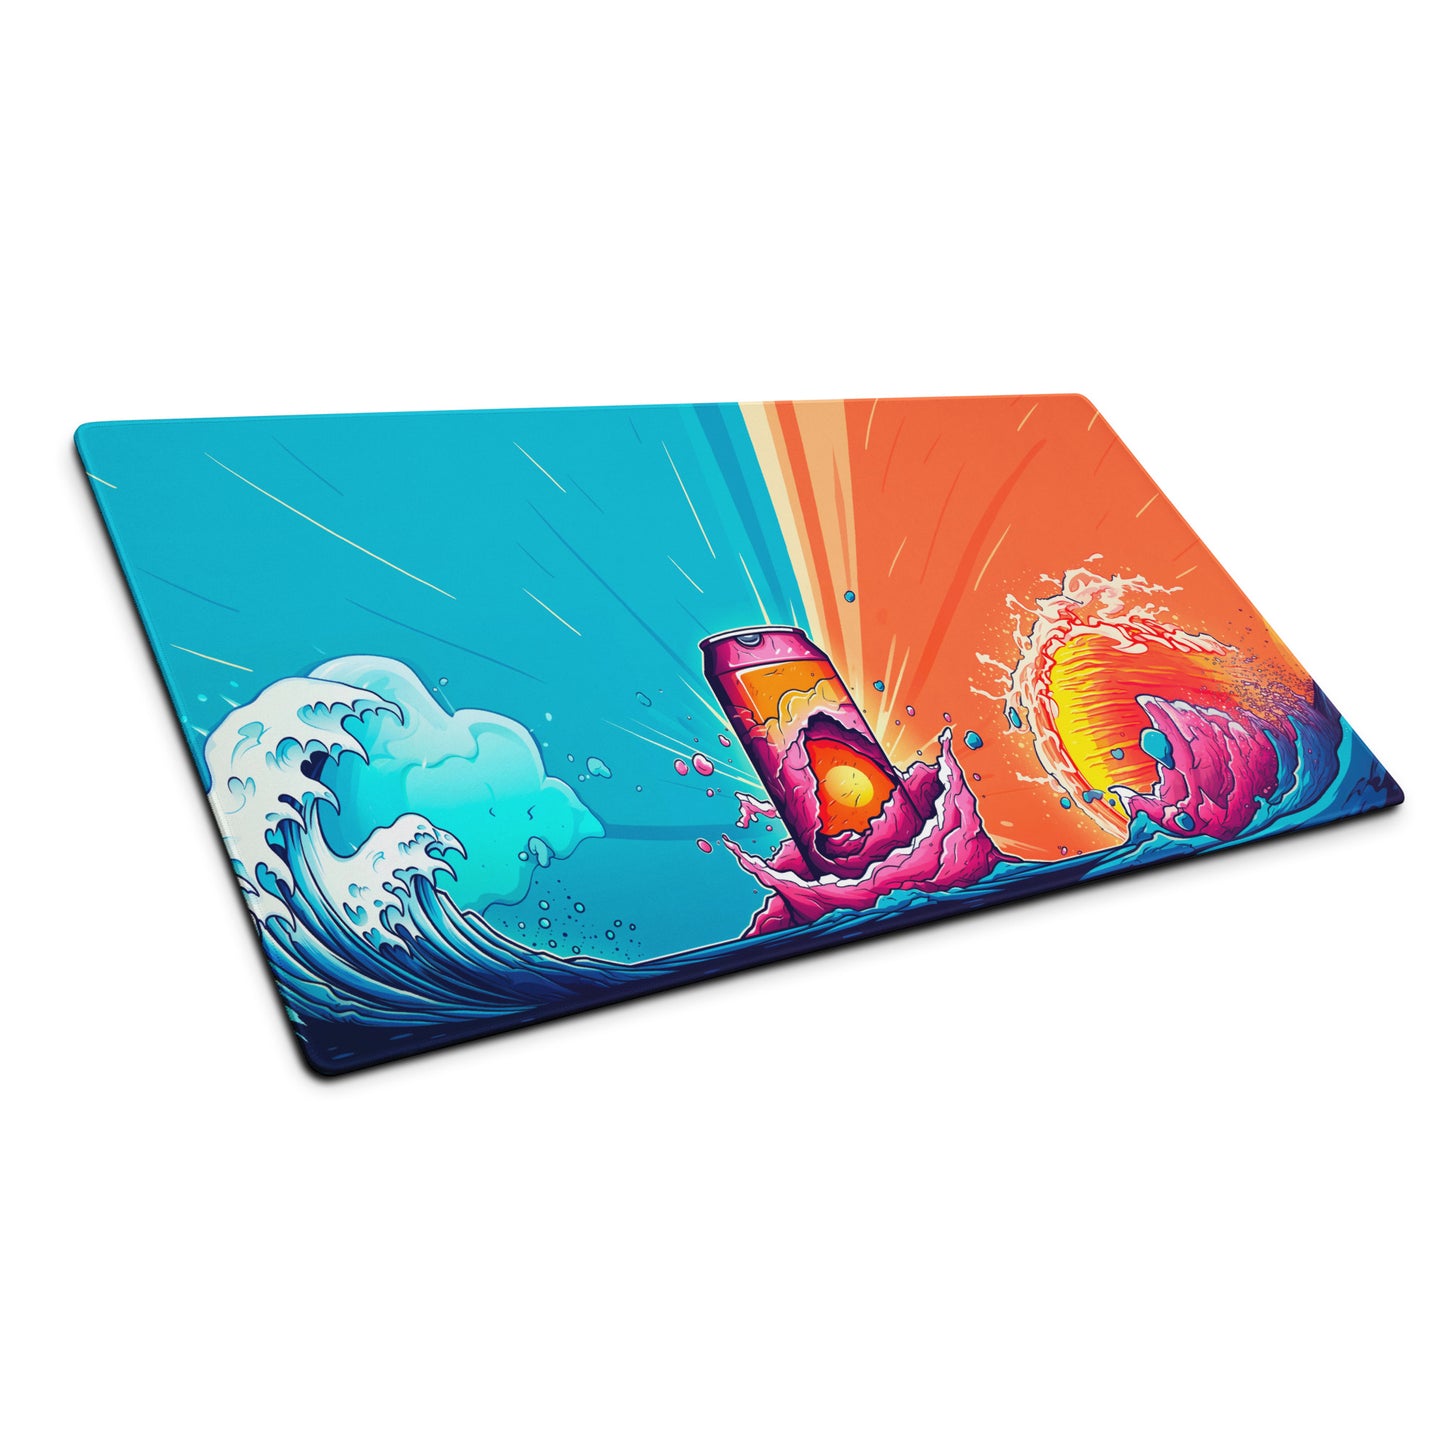 A 36" x 18" blue and orange desk pad with a soda can in the middle sitting at an angle.